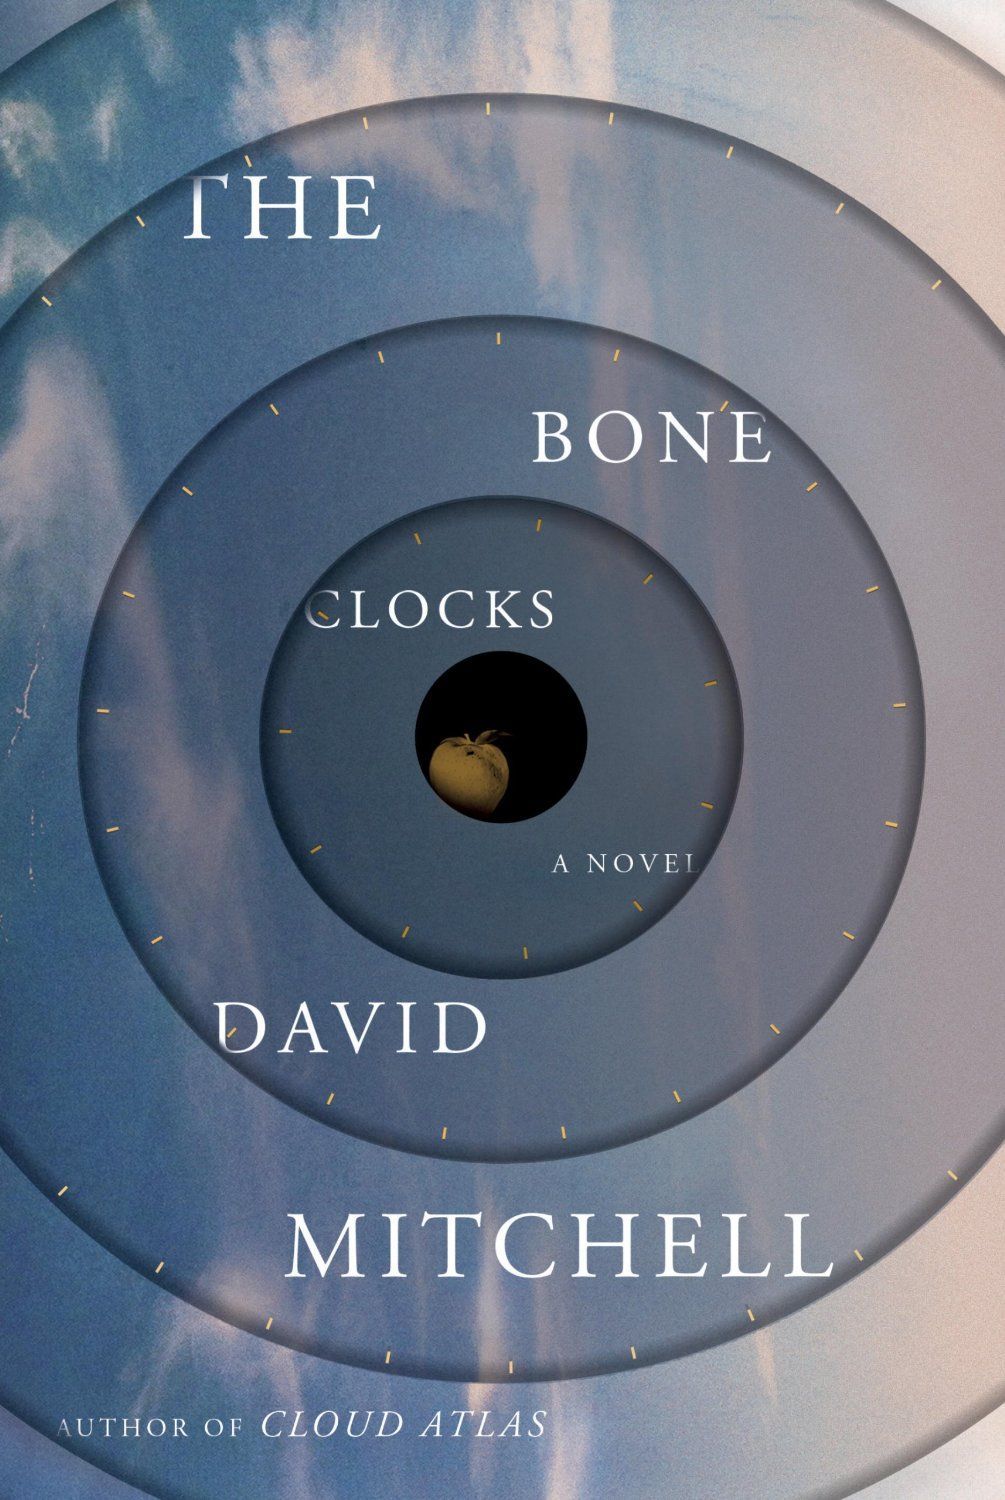 Adding to the Übernovel: Why David Mitchell Does What He Does